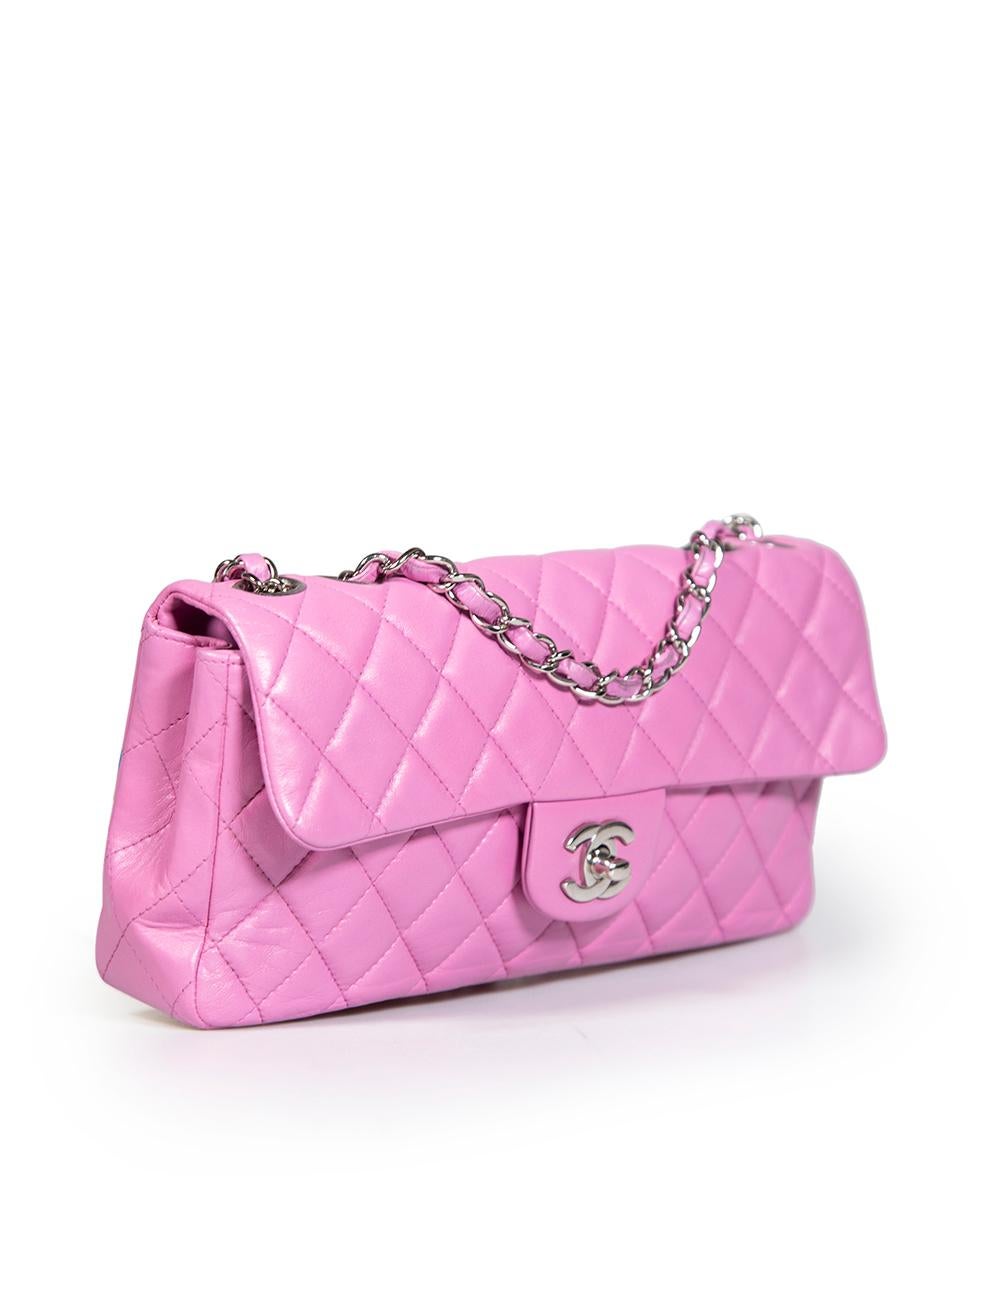 CONDITION is Good. Minor wear to bag is evident. Light tarnishing to metal hardware and some marks inside the main compartment base. Please note that the leather has been re-coloured to pink on this used Chanel designer resale item.
 
 
 
 Details
